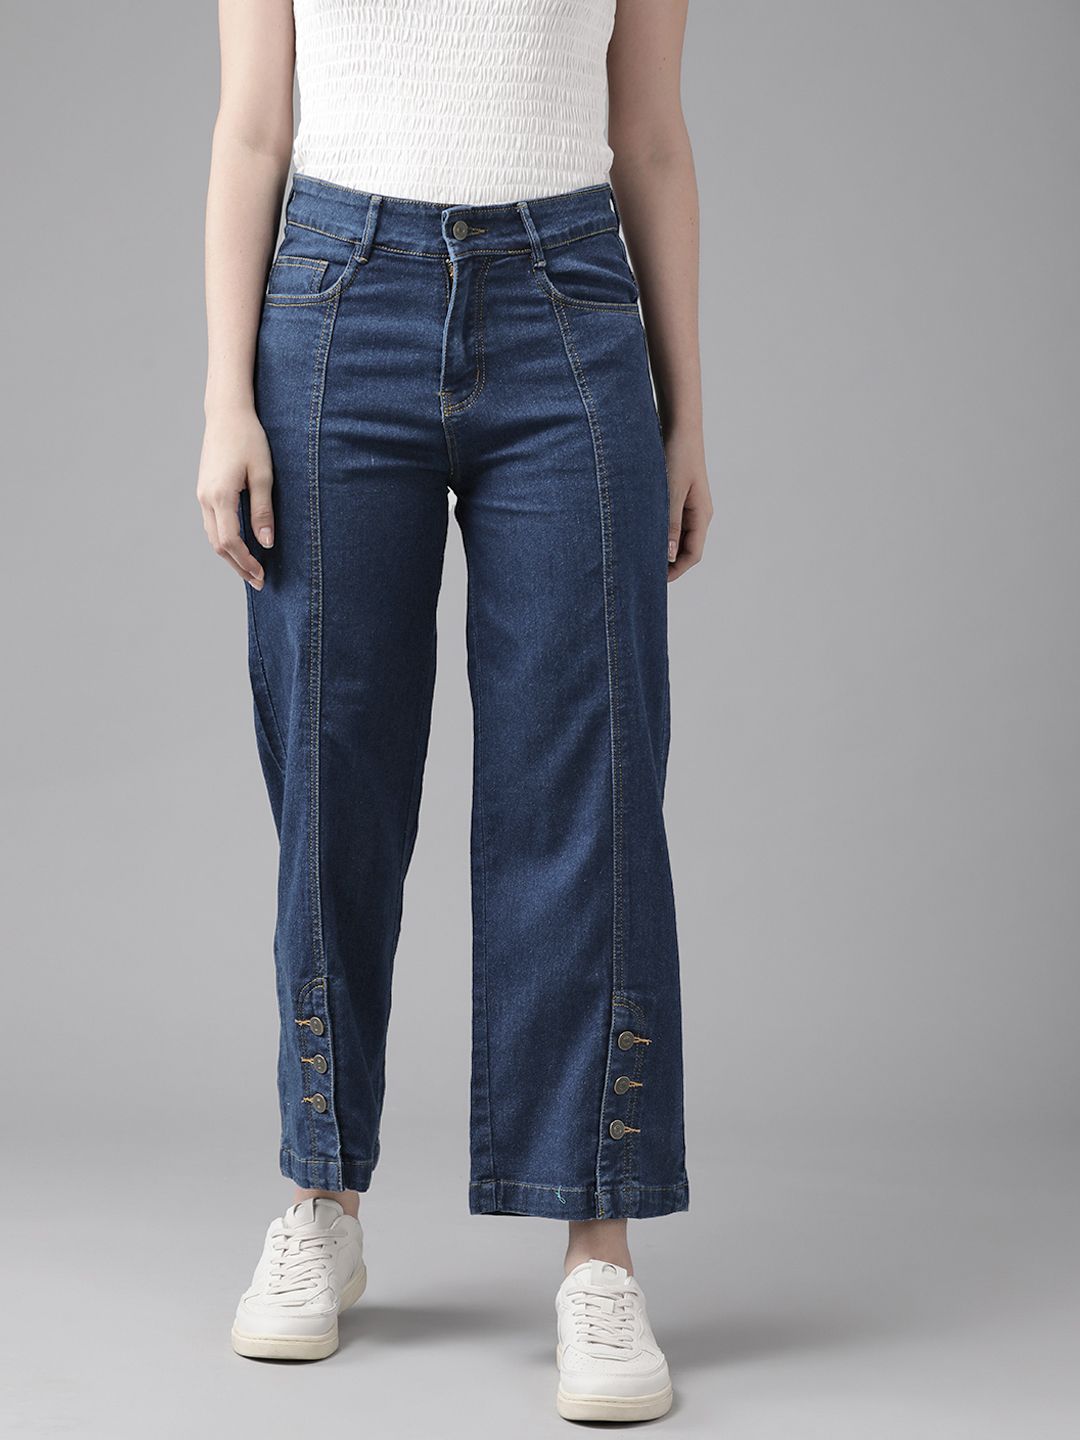 KASSUALLY Women Blue Wide Leg High-Rise Stretchable Jeans Price in India